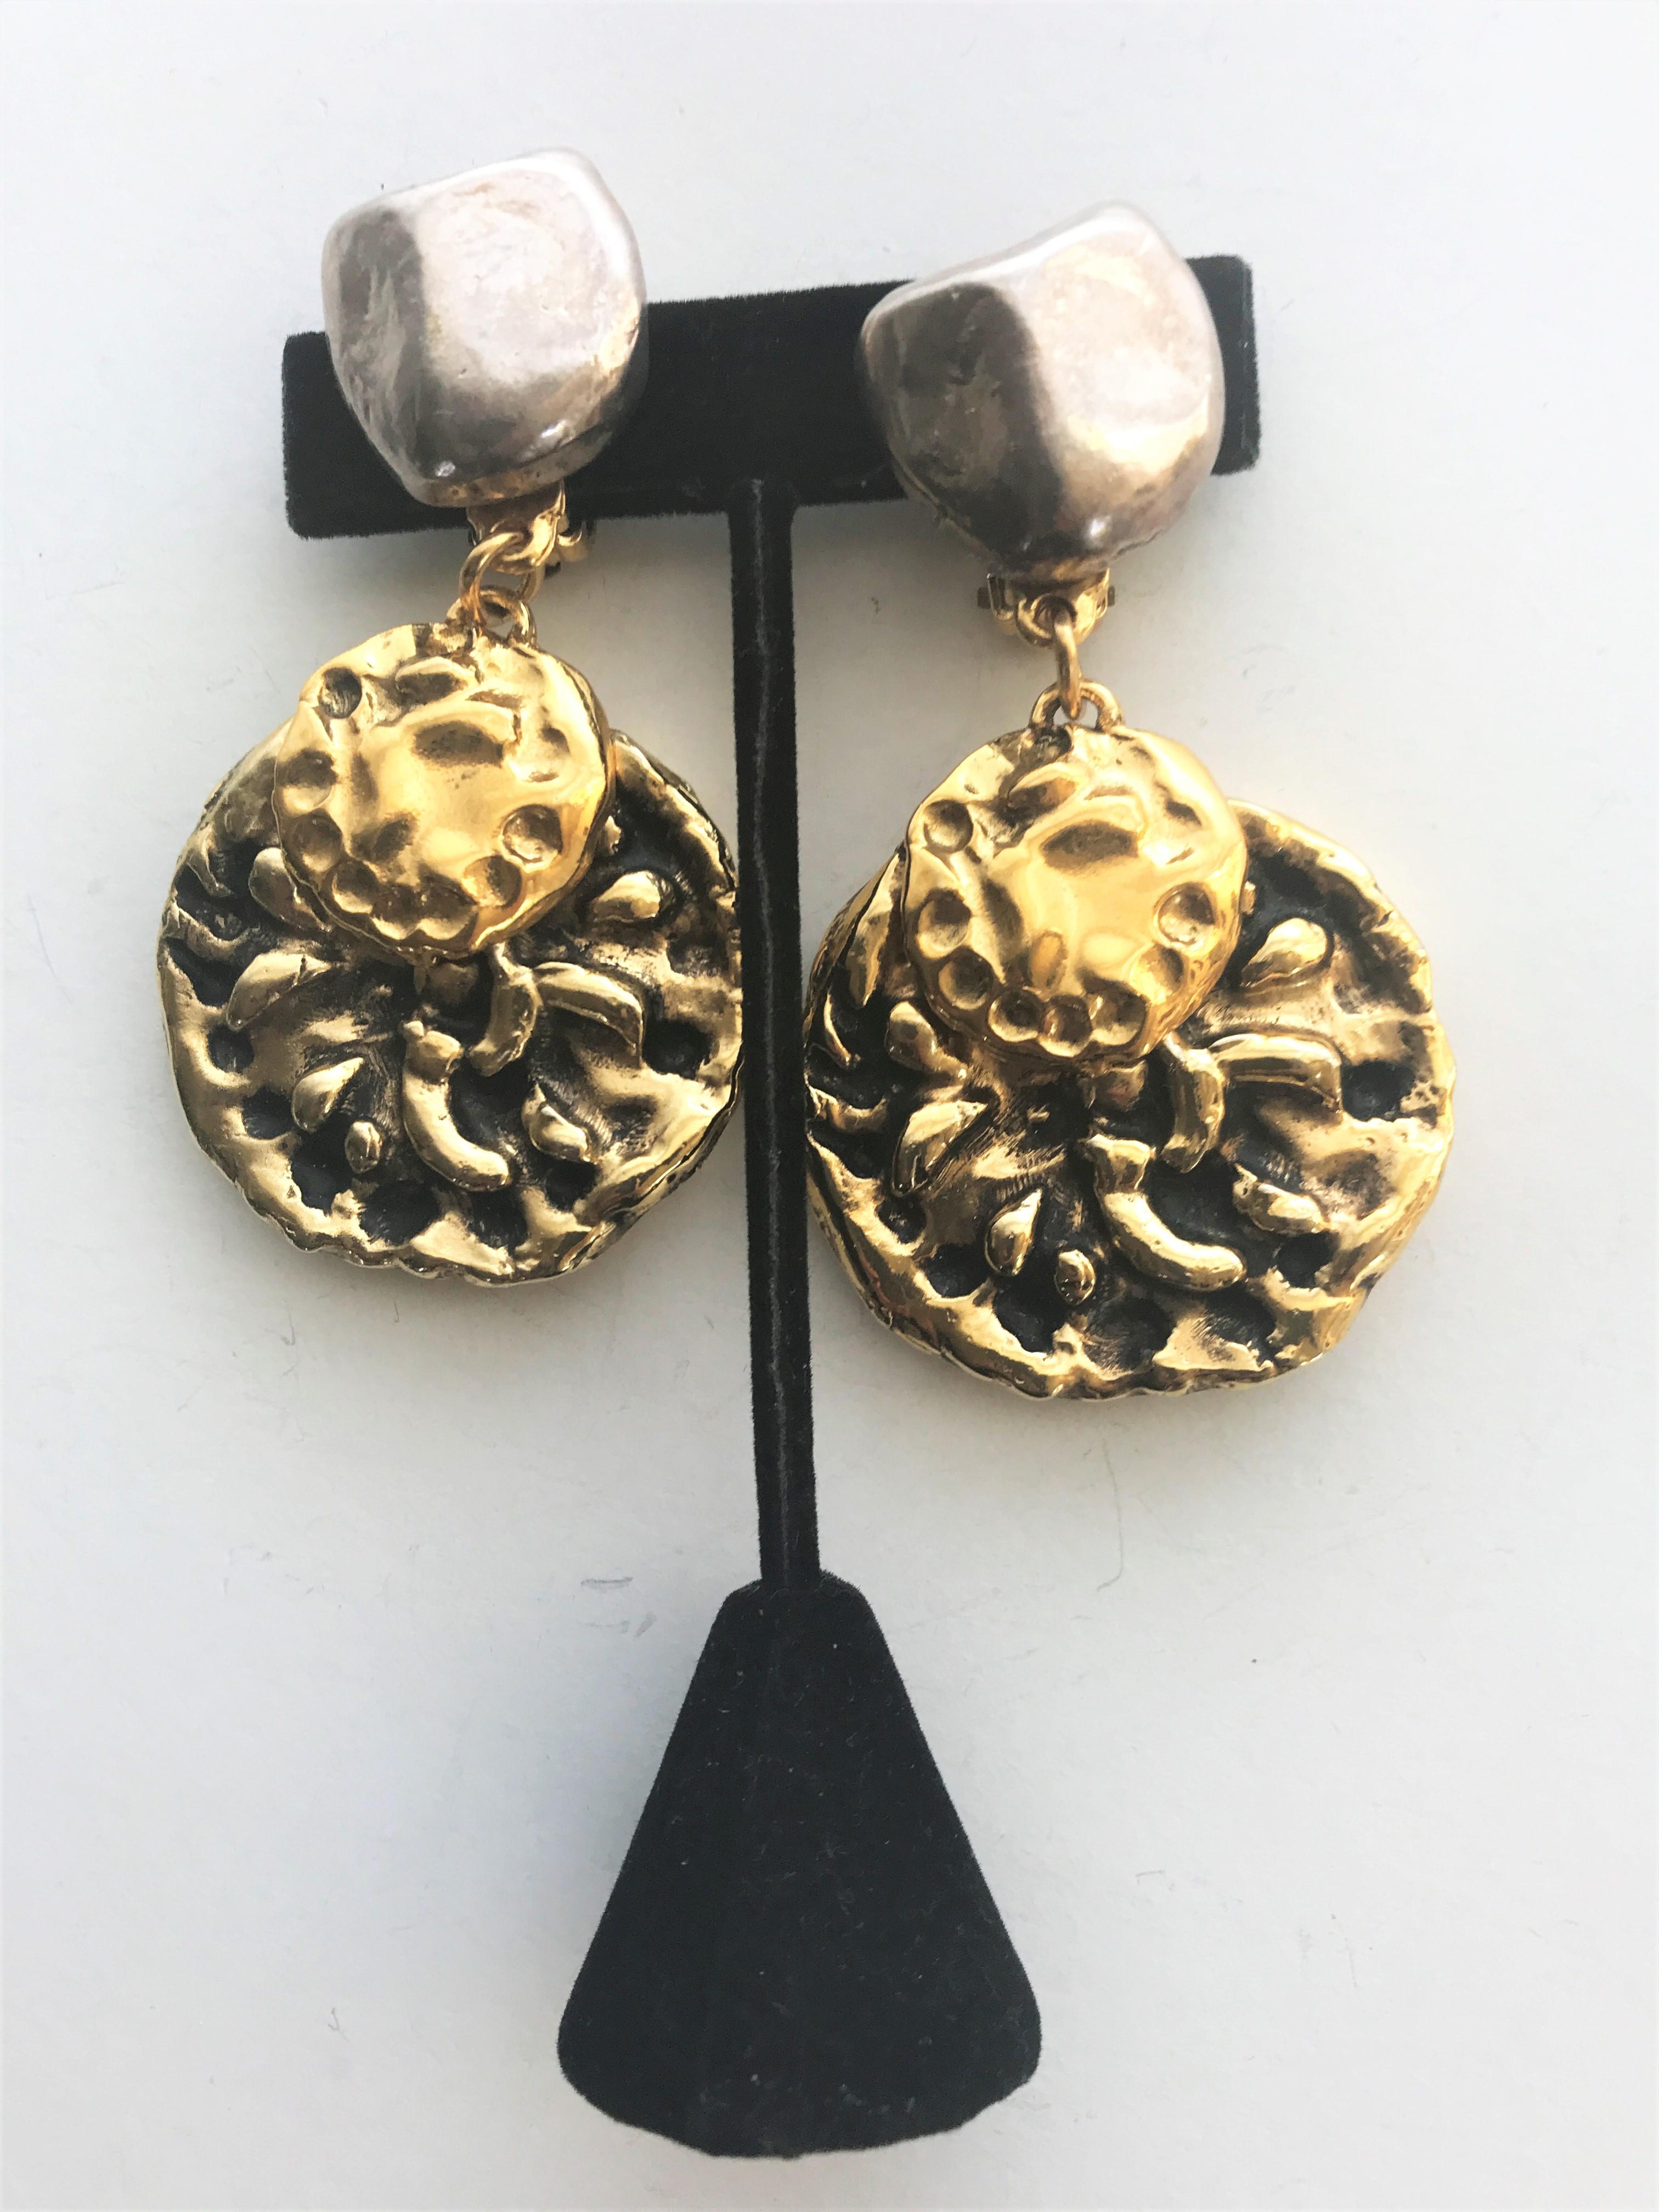 Very decorative clip-on earrings signed YSL. The upper part is made of pressed silver metal and looks like a Y. On the back you find the signature. The medallion attached is gold and black typical for YSL. Very distinctive color and material